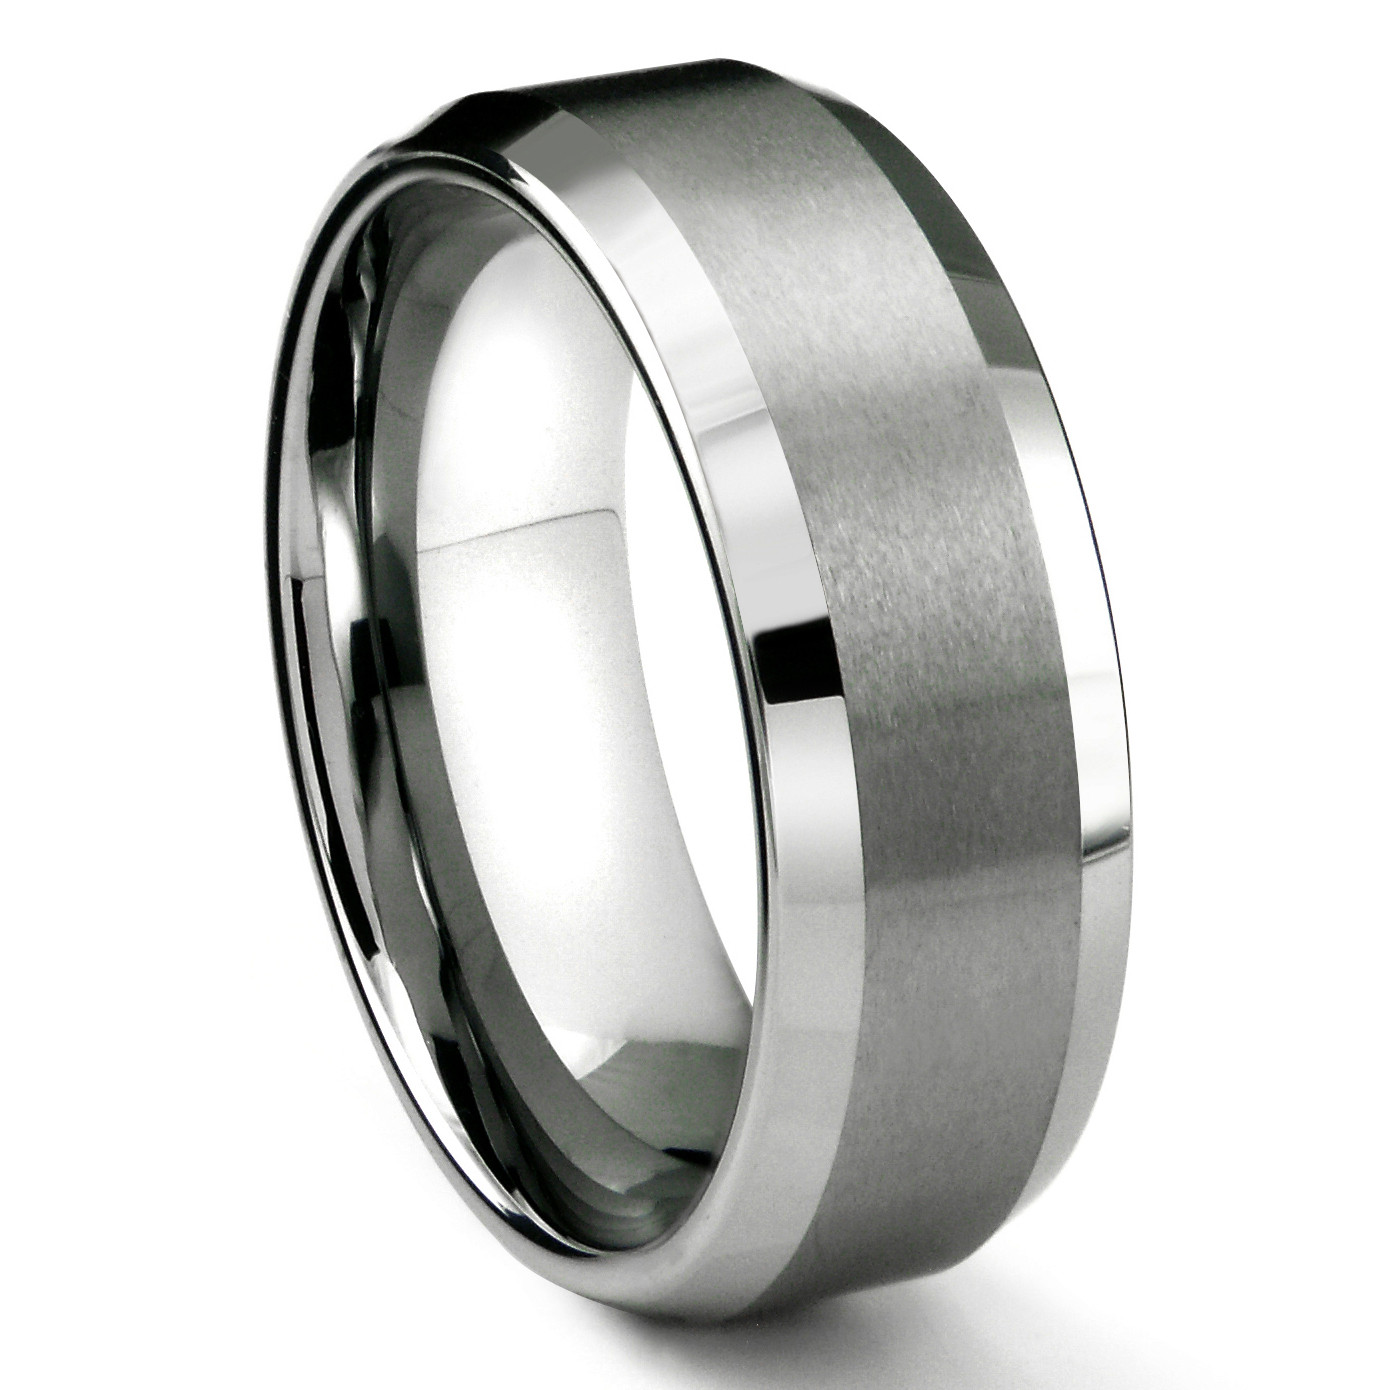 Tungsten Carbide Wedding Bands
 RASORET Tungsten Carbide Ring in fort Fit and Satin Finish